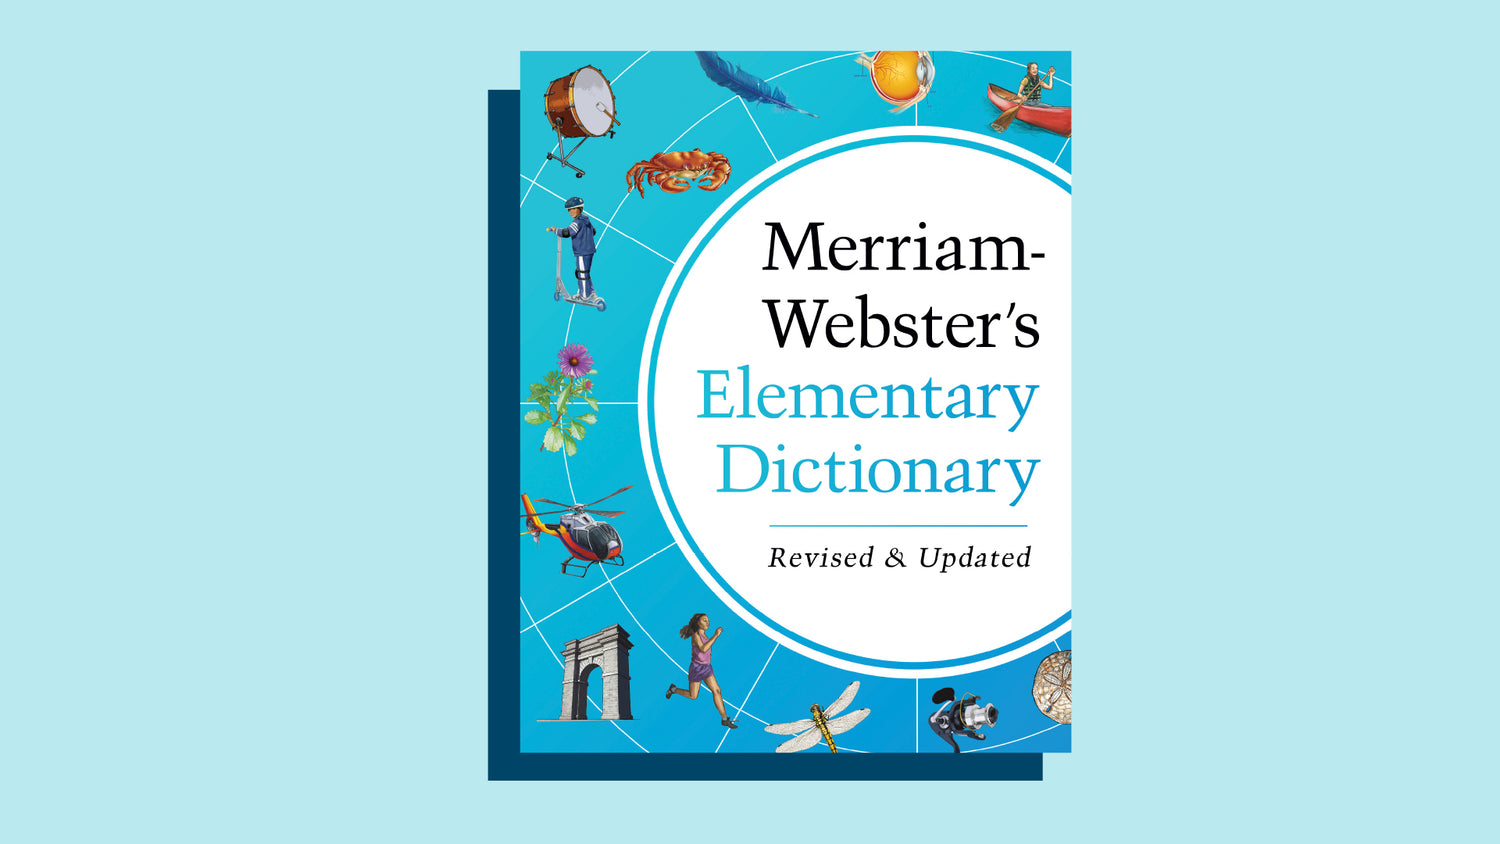 Merriam-Webster's Elementary Dictionary - A must-have resource for children!